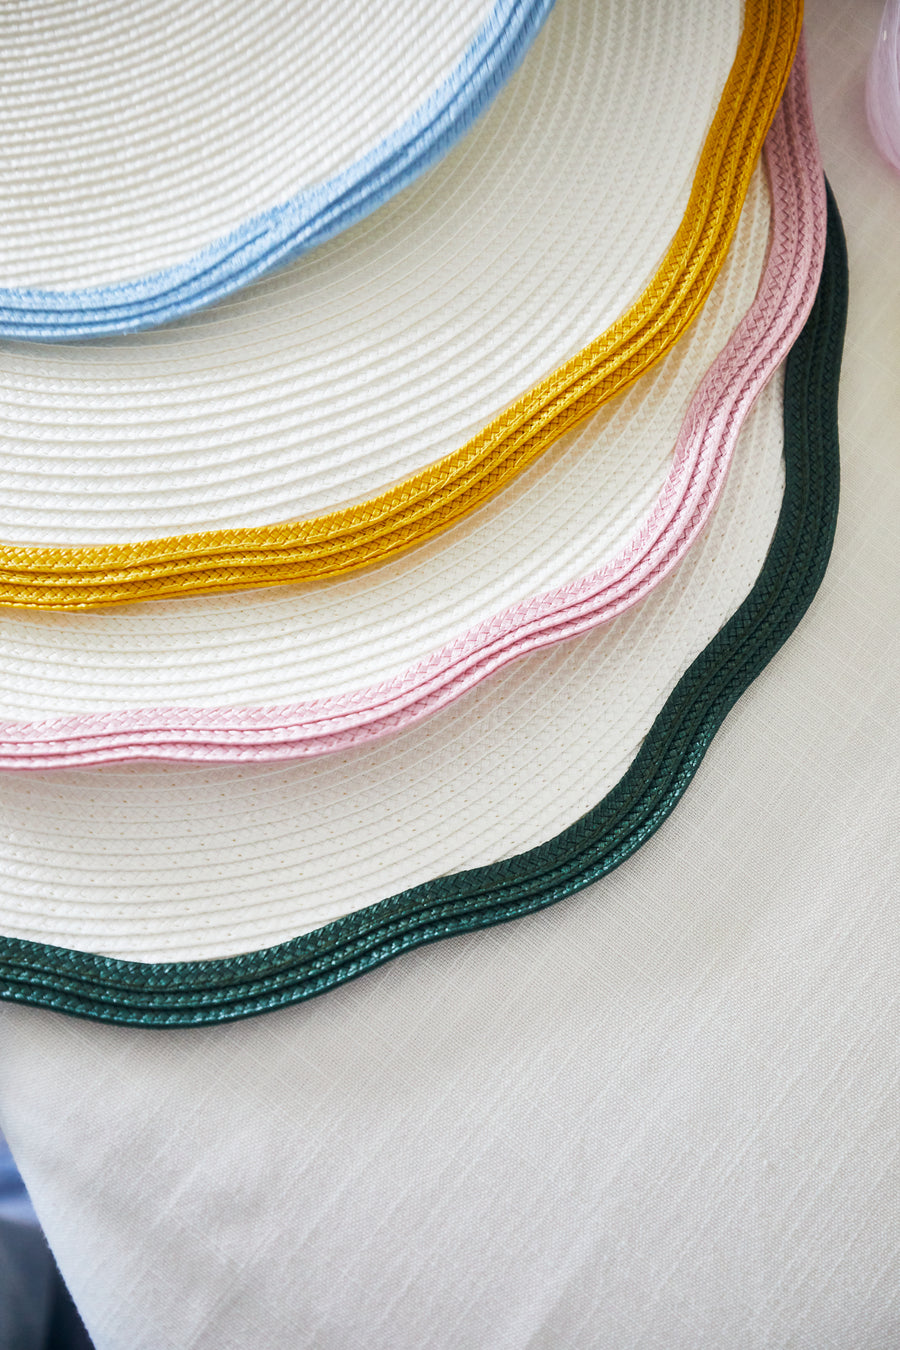 Straw Wave Placemats - set of 4